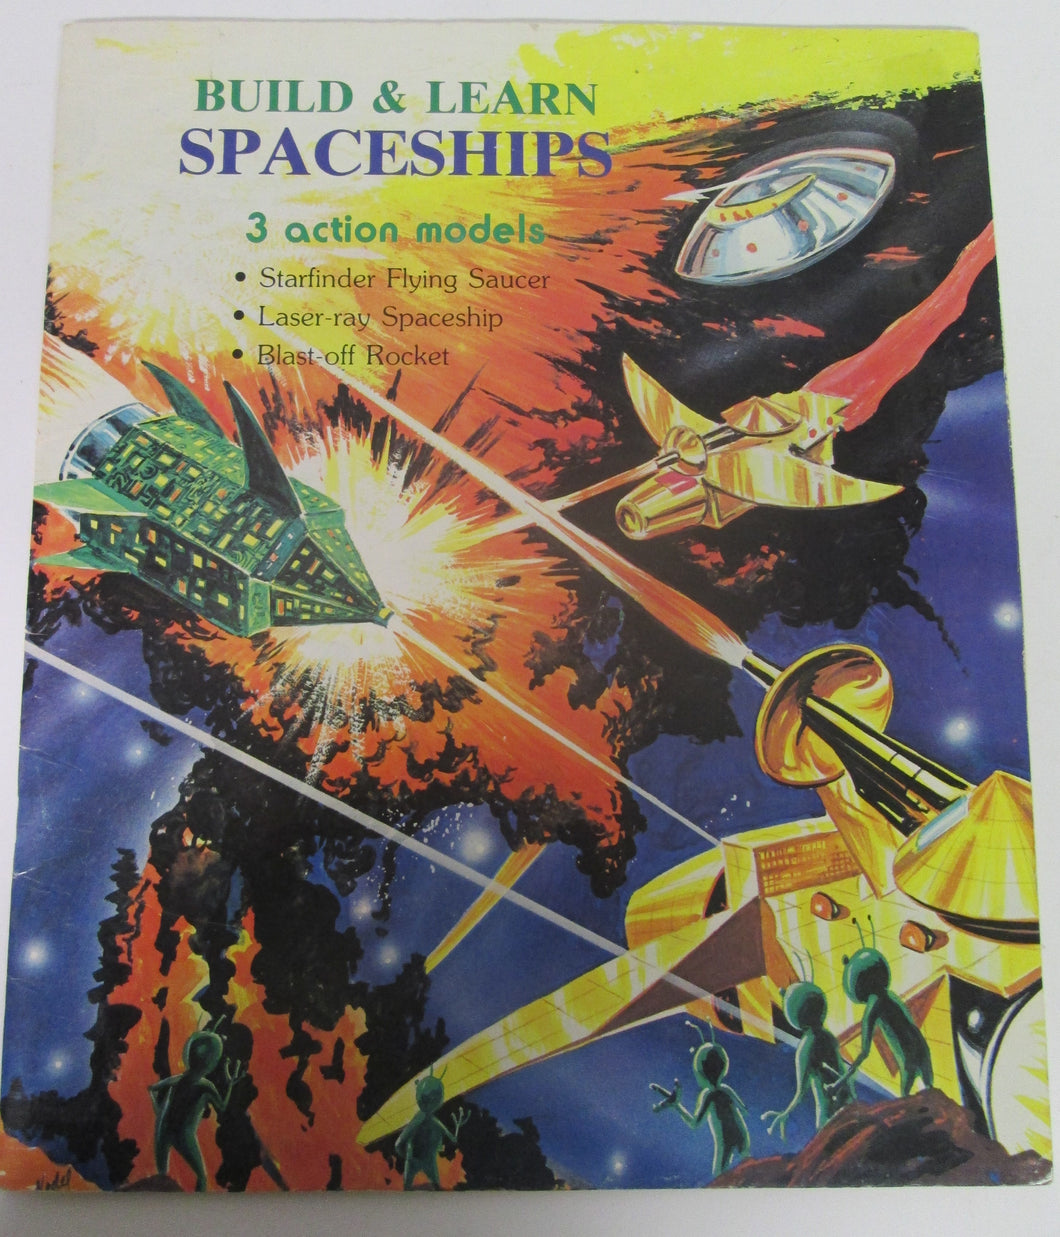 Build and Learn Spaceships 3 Action Models 1980